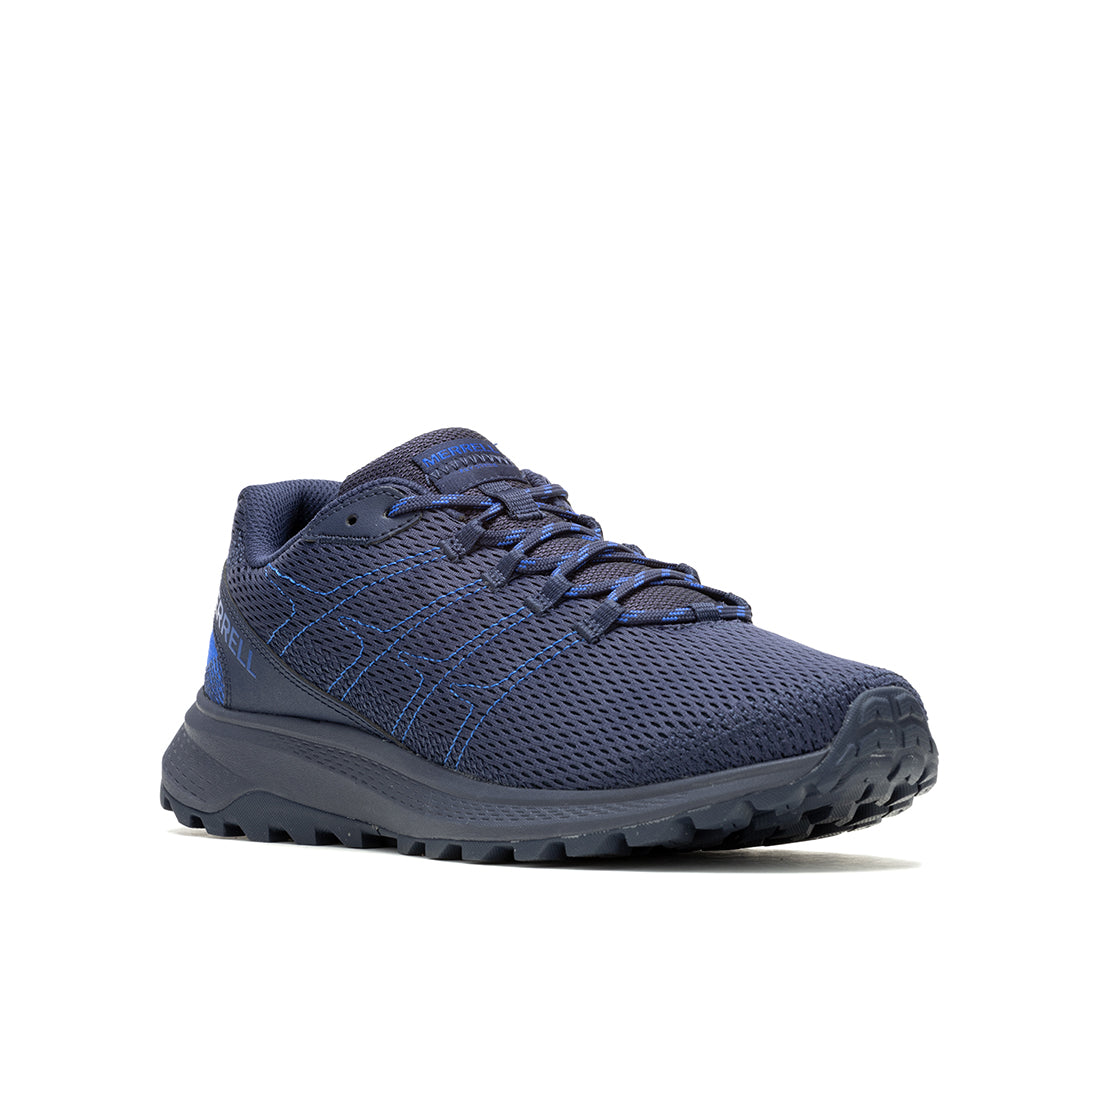 Fly Strike - Sea/Navy Mens Trail Running Shoes - 0